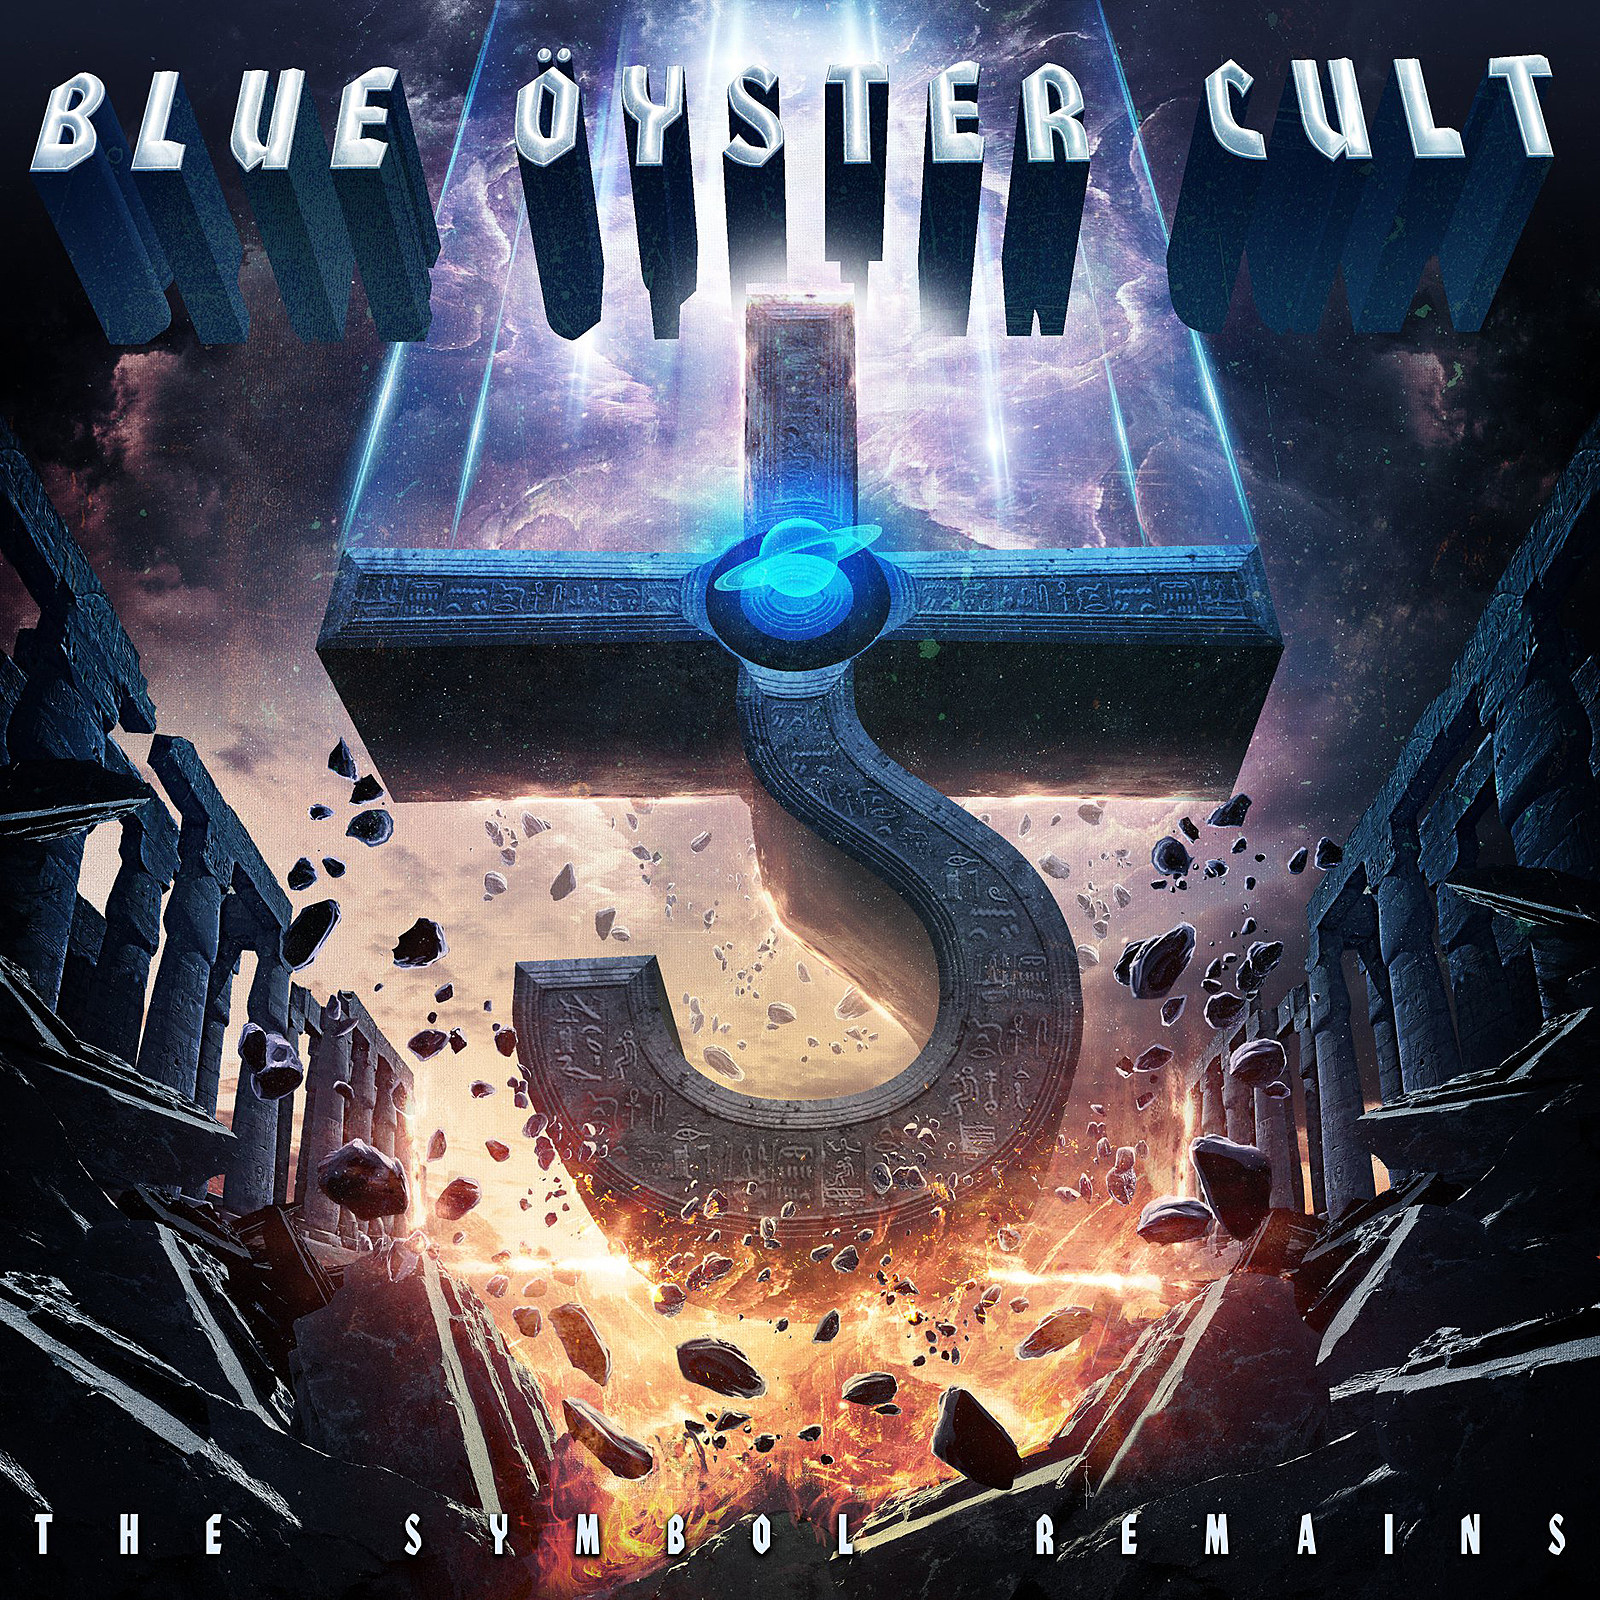 Blue Oyster Cult is Back with The Symbol Remains, Their First in 20 Years!